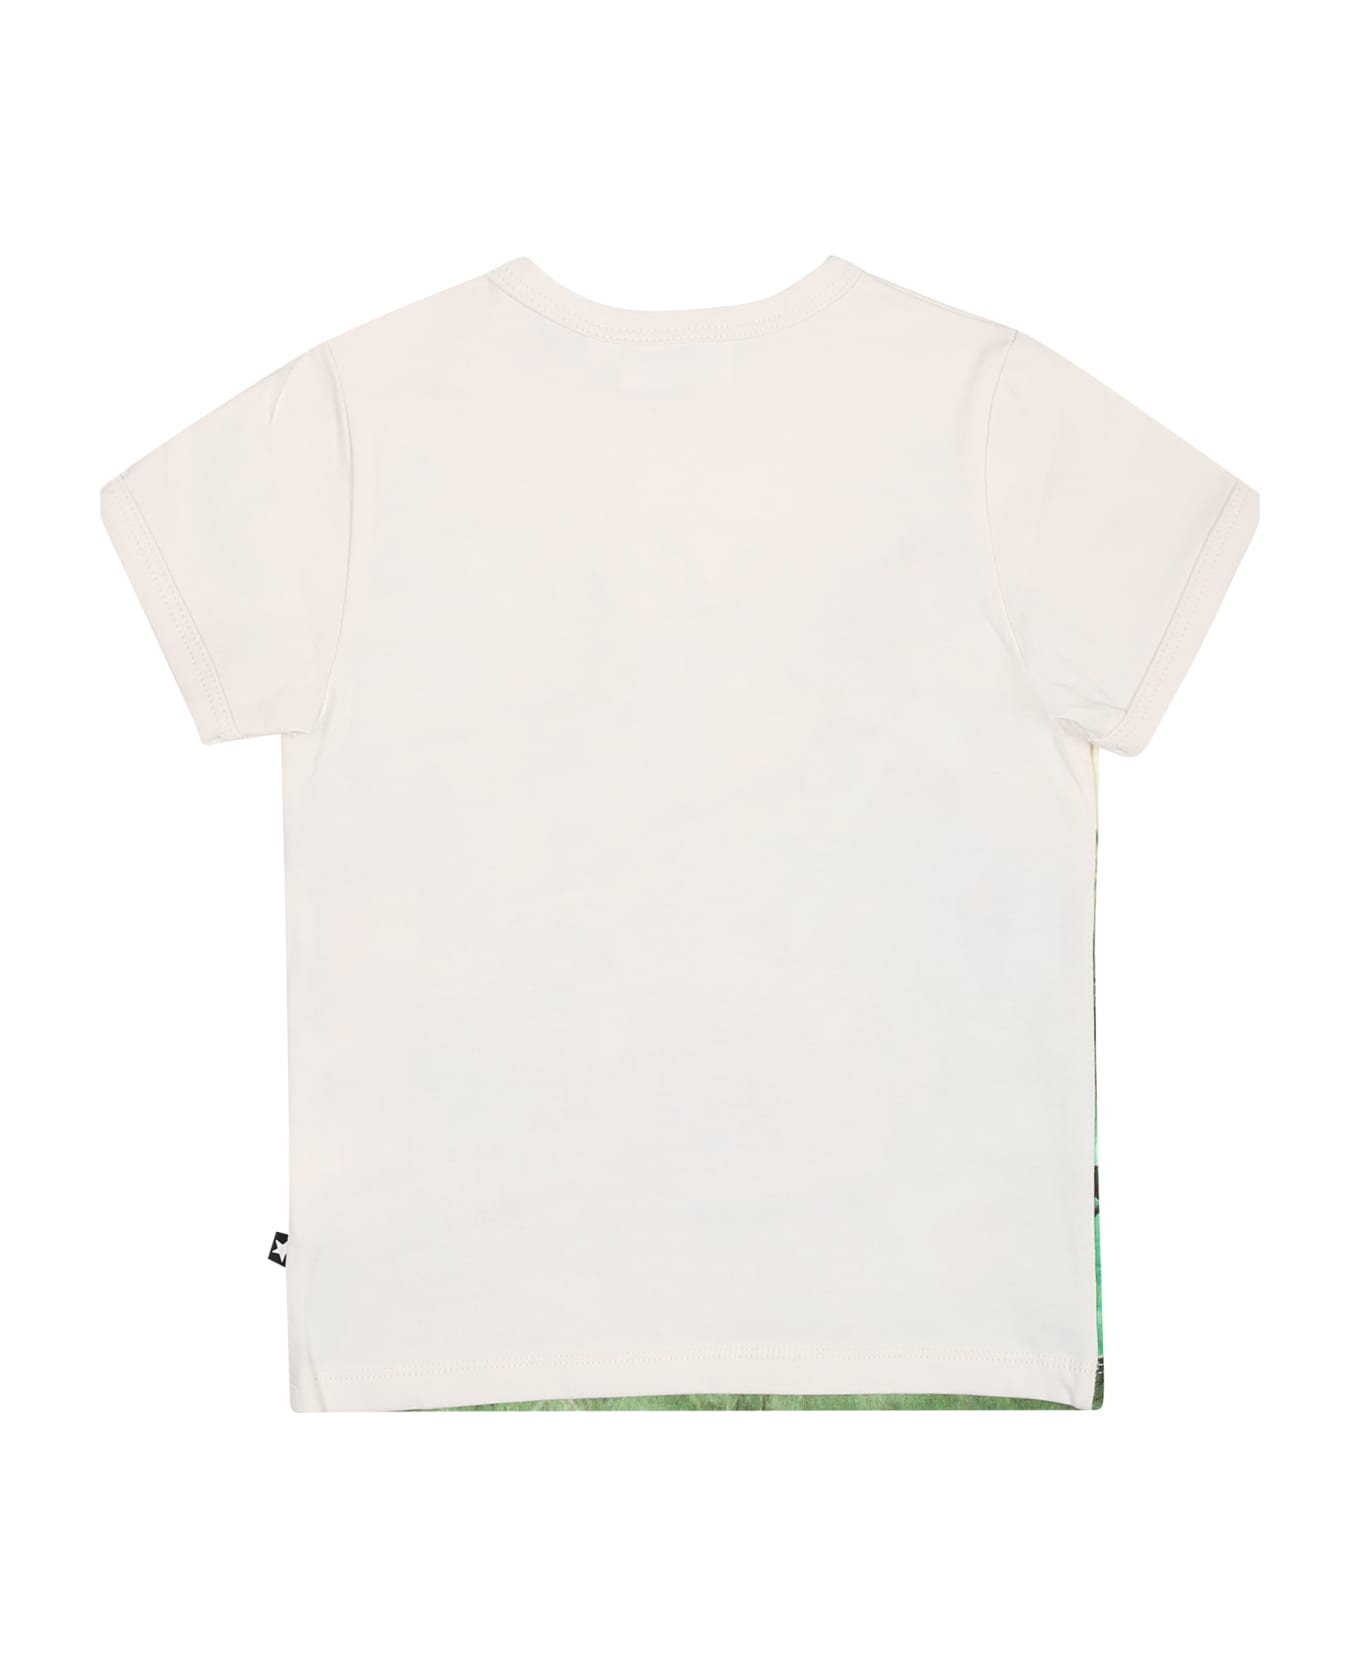 Molo Ivory T-shirt For Baby Kids - Ivory